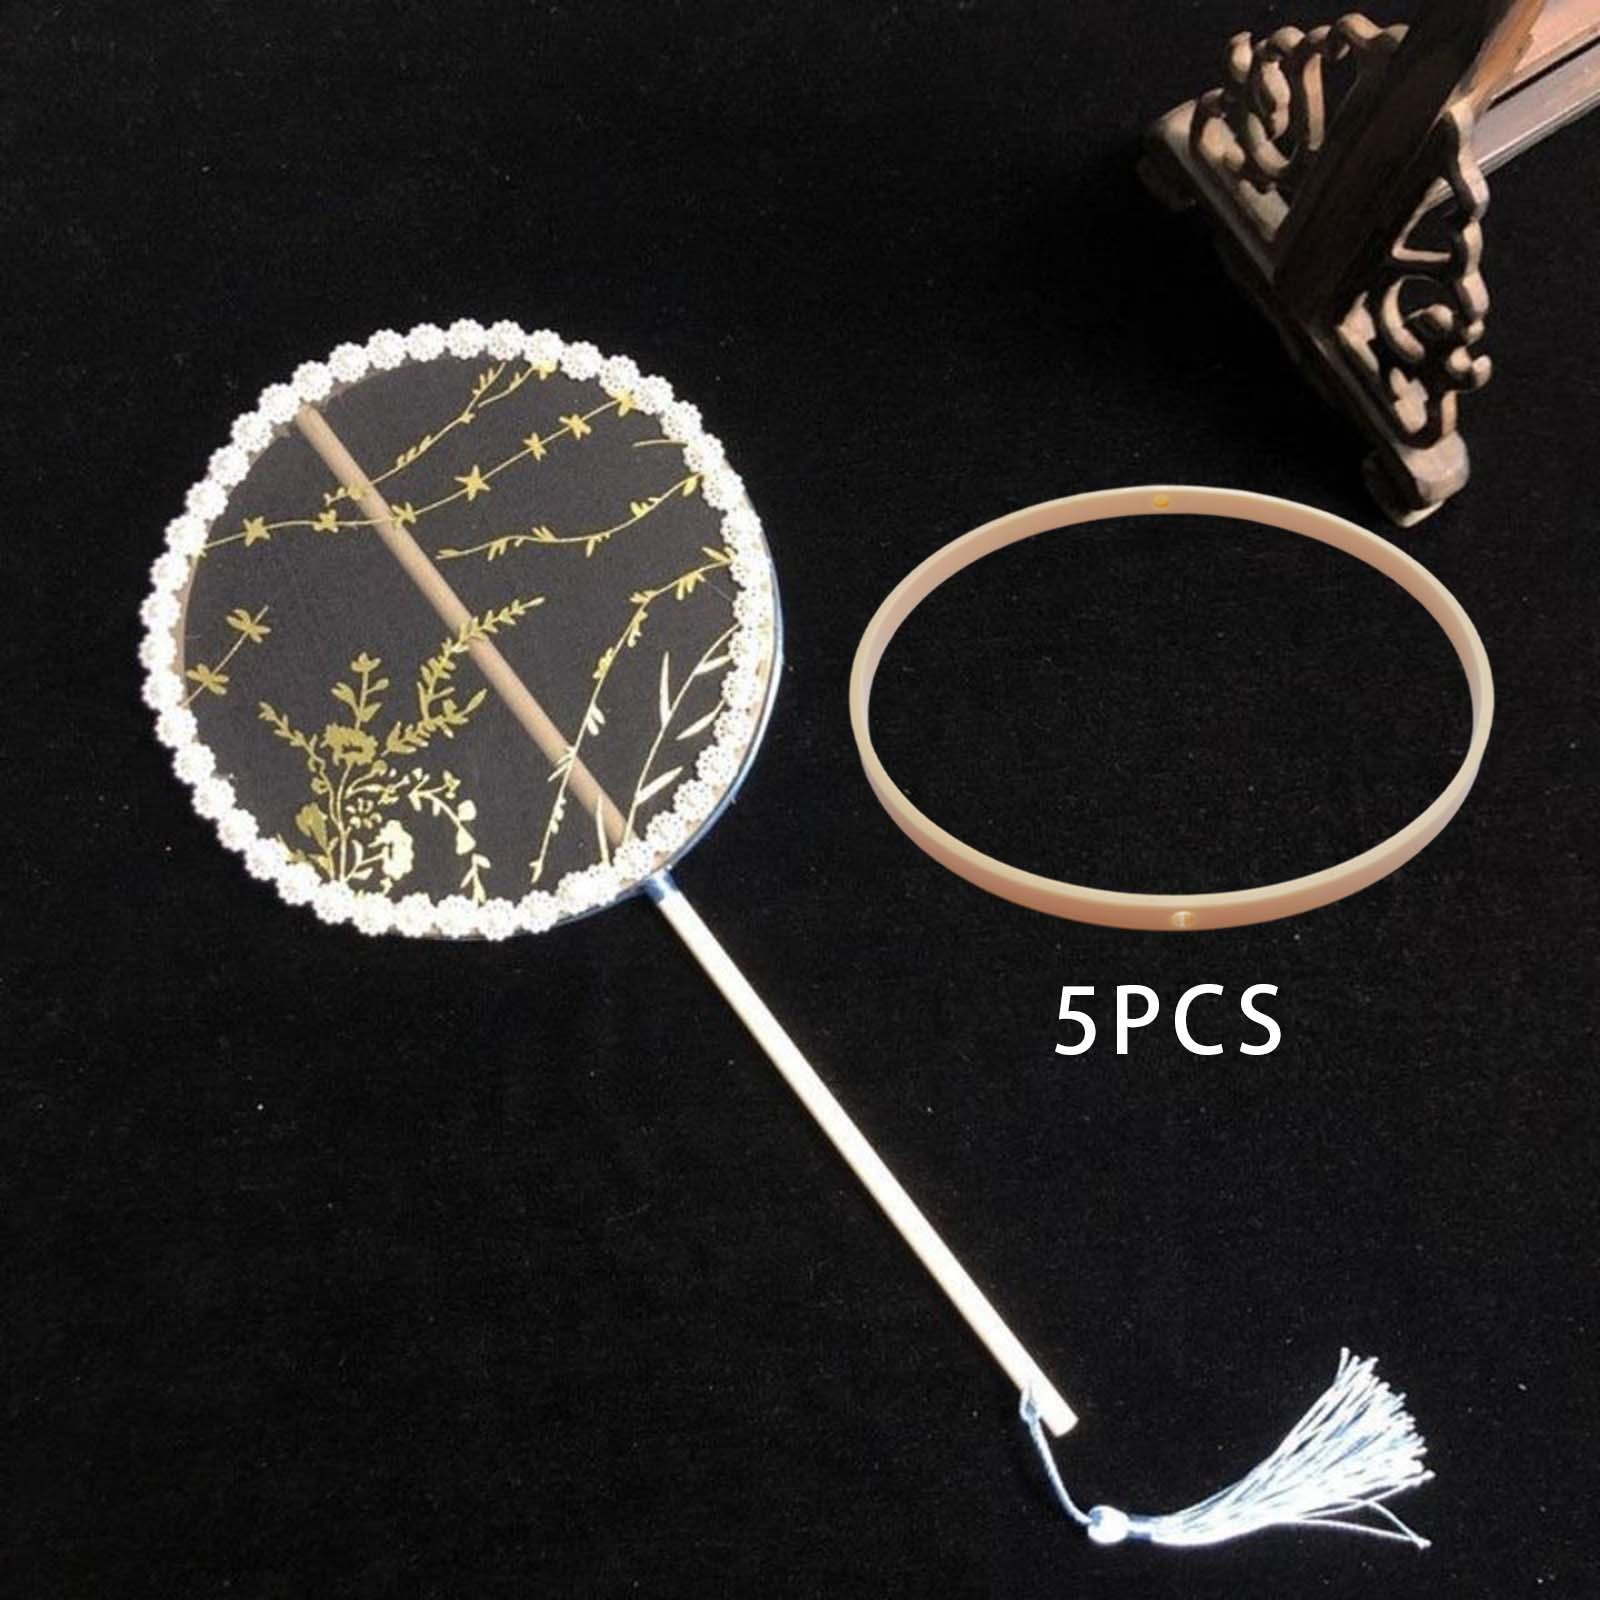 5Pcs DIY Hand Fan Frame Gift Dreamcatcher Hoop for Holiday Birthday Cosplay